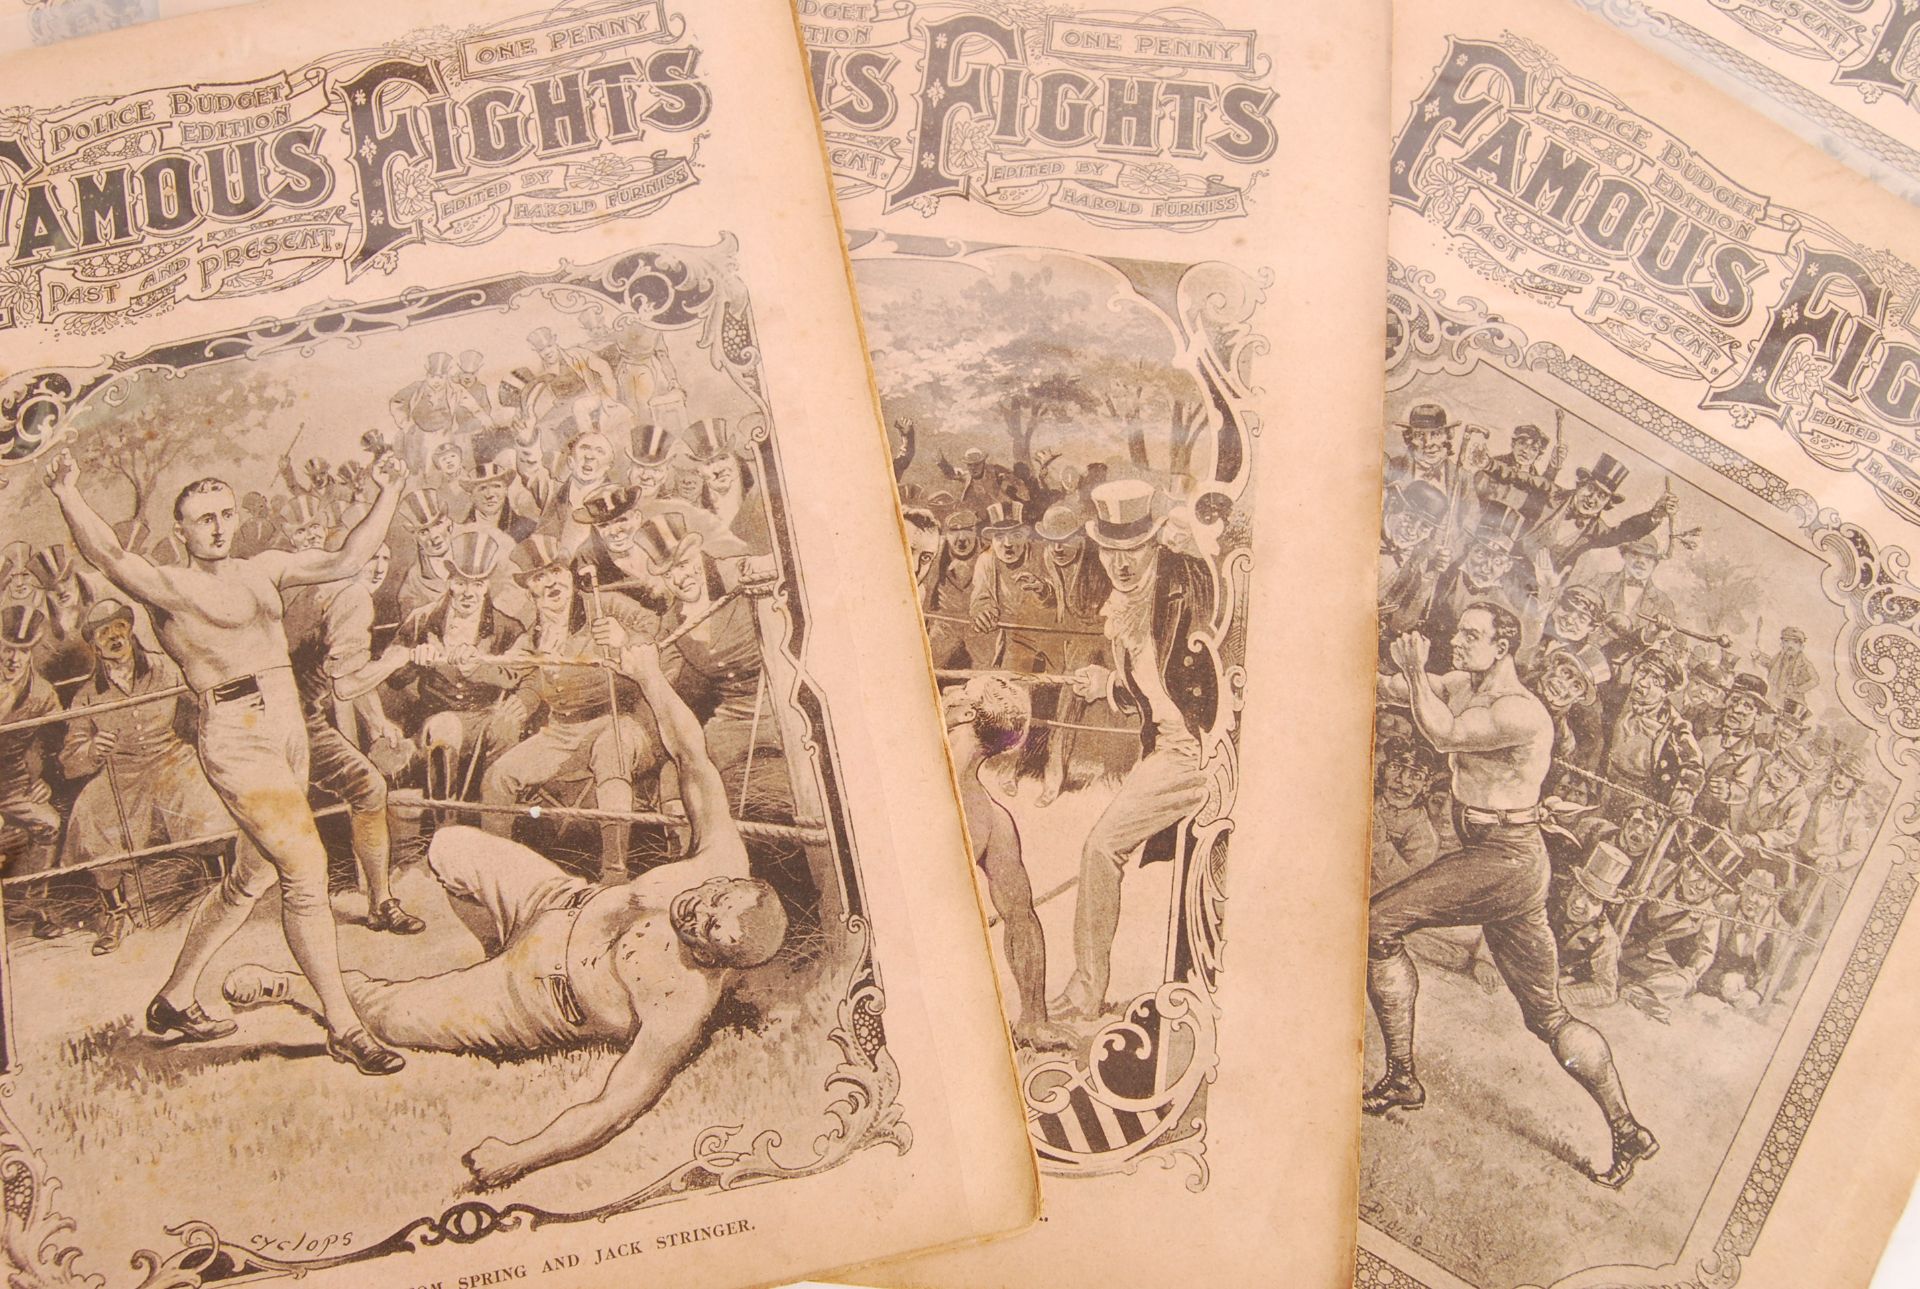 COLLECTION OF EDWARDIAN FAMOUS FIGHTS MAGAZINES - Image 2 of 4